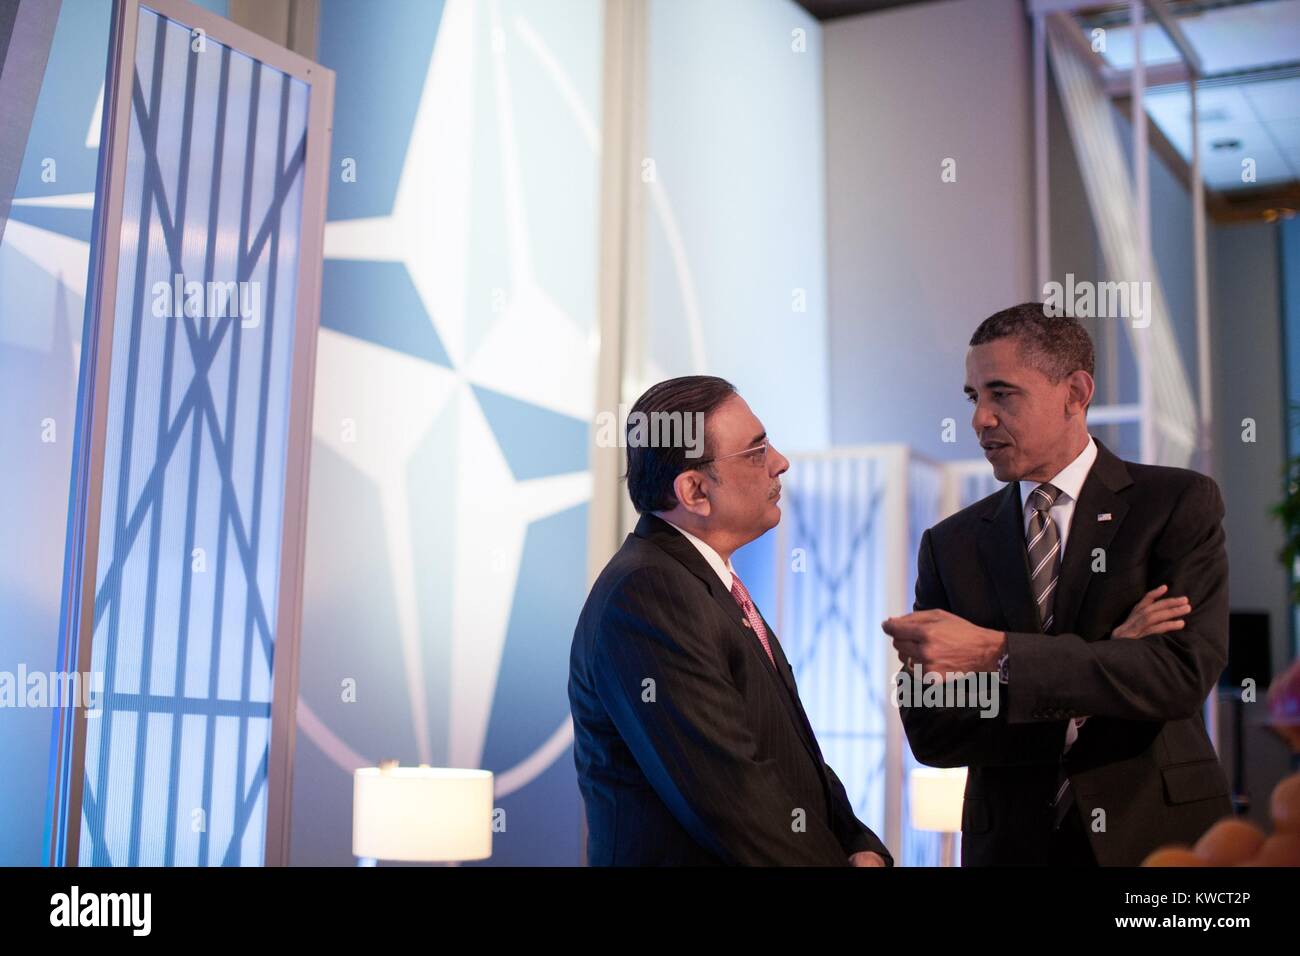 Barack Obama talks with President Asif Ali Zardari of Pakistan before a meeting on Afghanistan. They were attending a NATO Summit in Chicago, Ill., May 21, 2012. (BSLOC 2015 3 191) Stock Photo